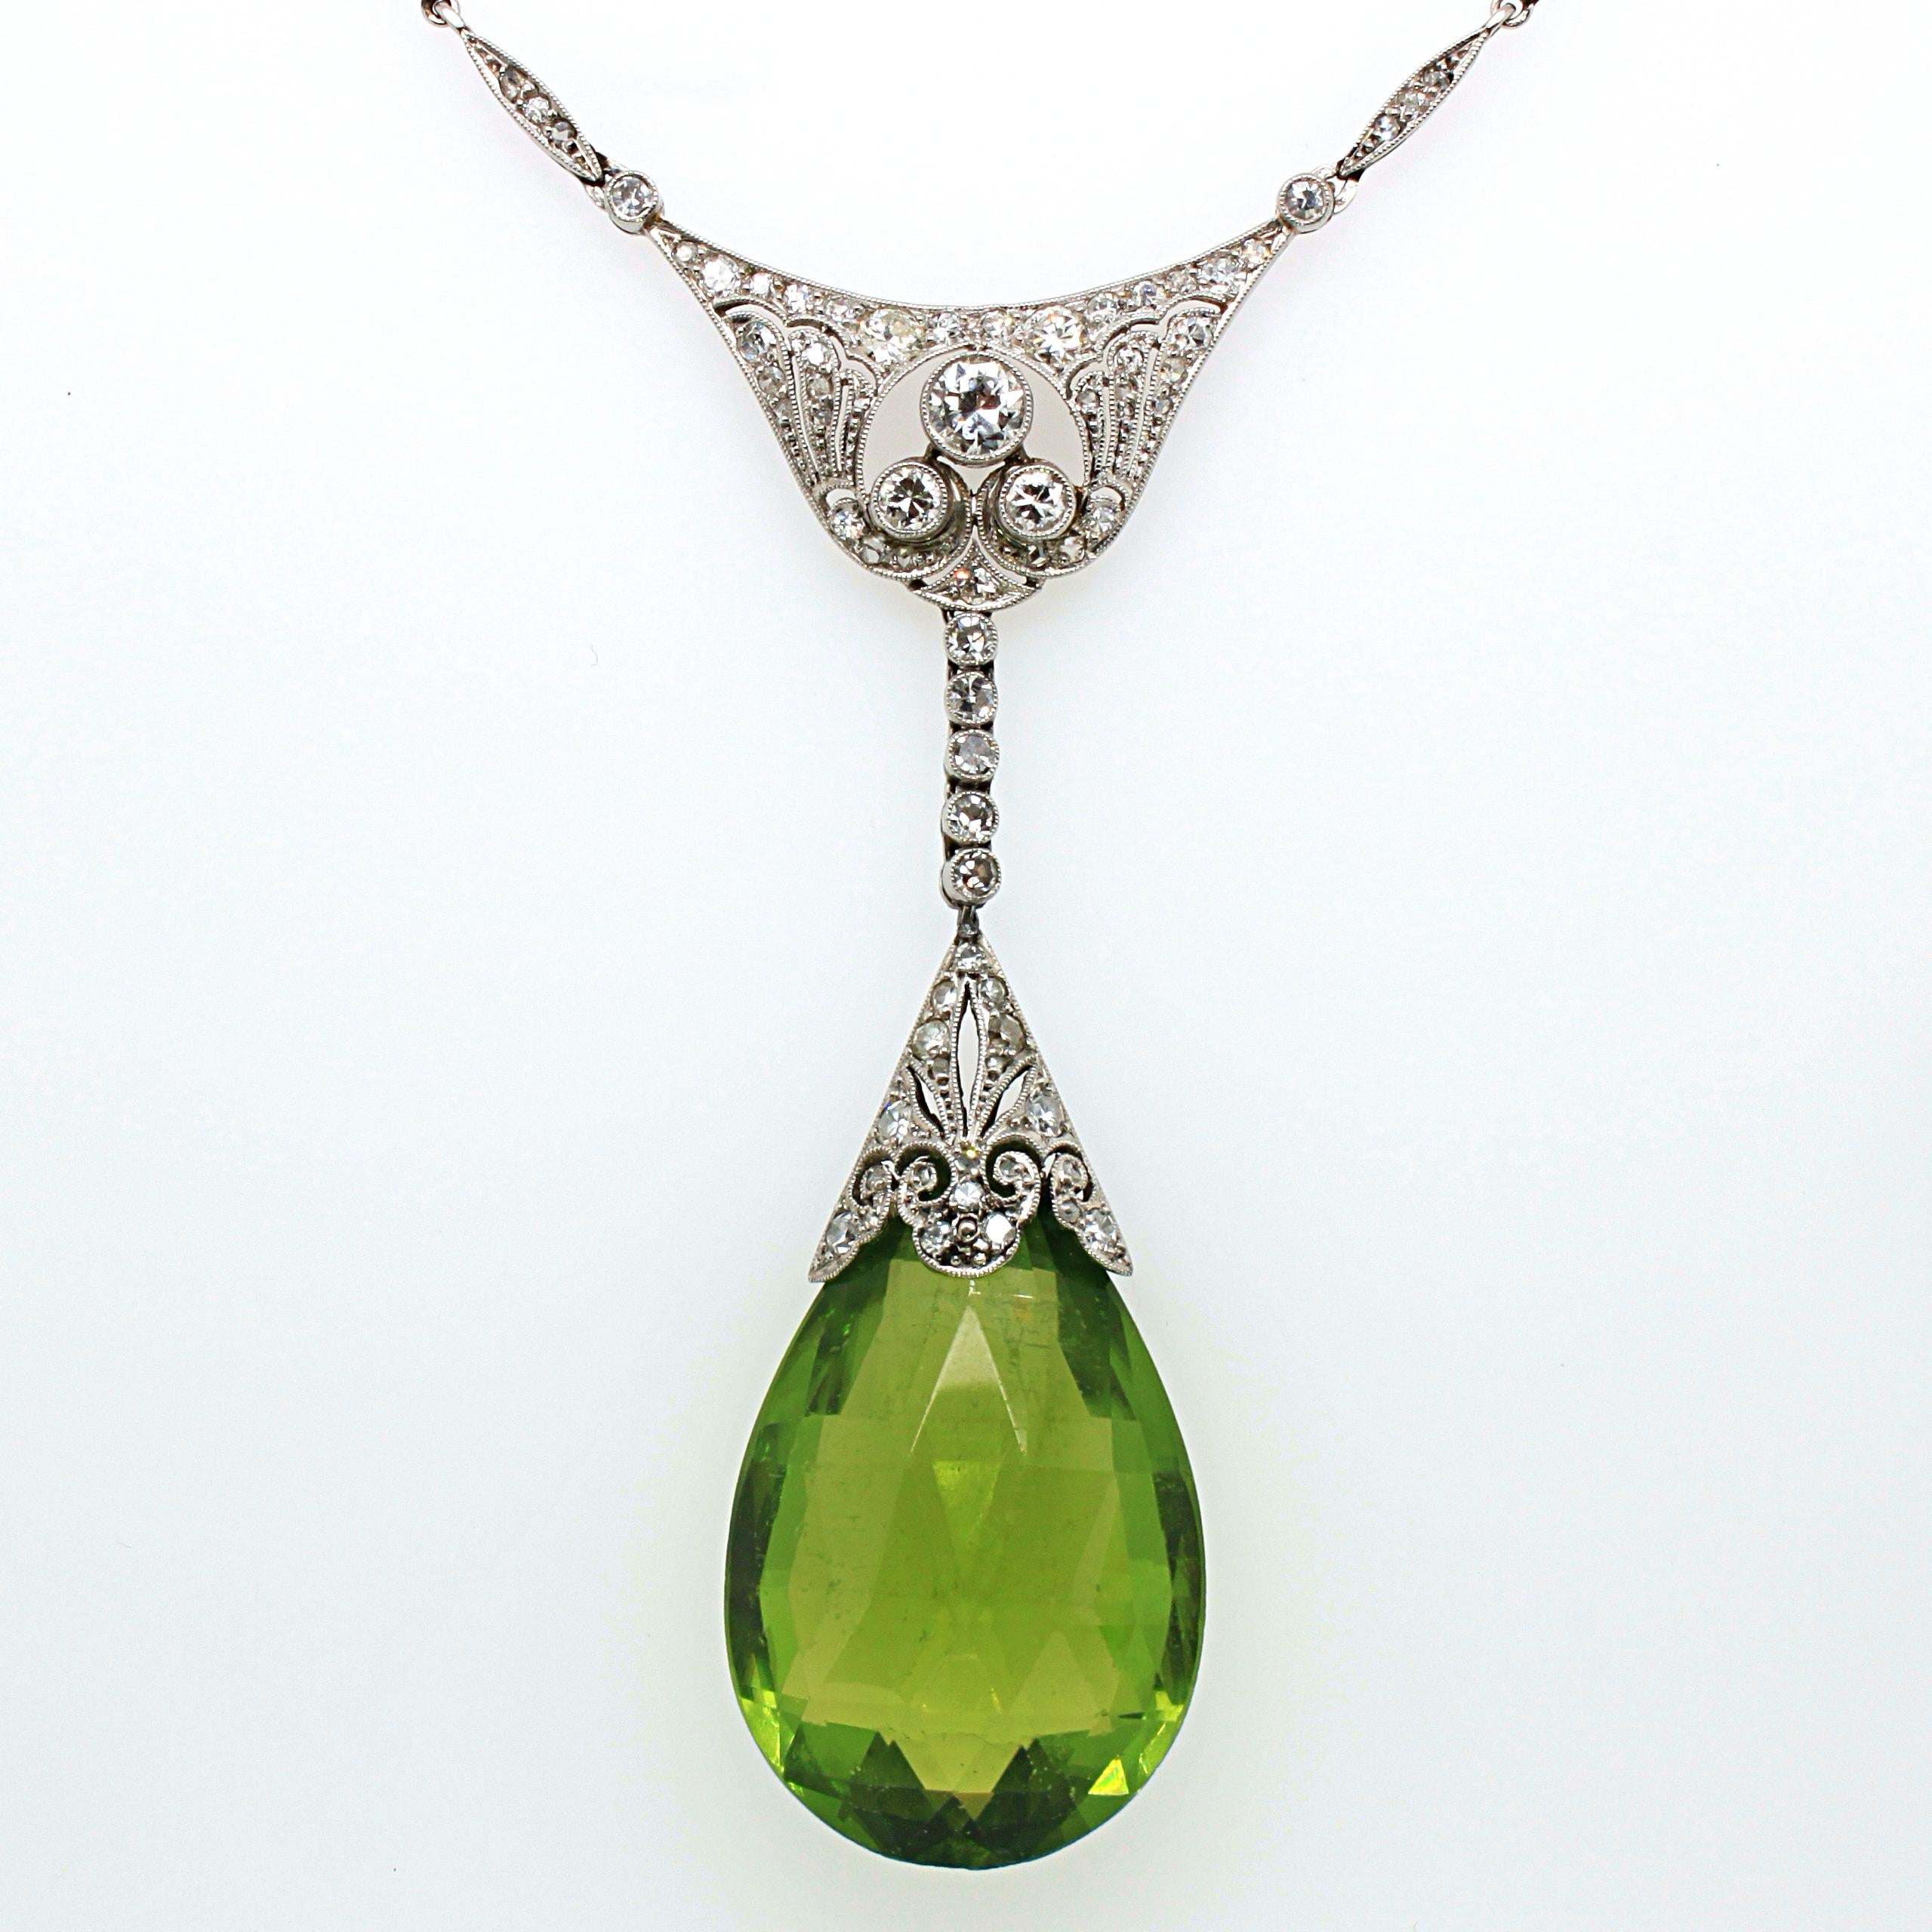 An Edwardian peridot briolette and diamond necklace in platinum, ca. 1910s. The Burmese peridot has a very tranquil and harmonious green colour, yet displays a beautiful crystal with a strong intensity. It weighs approximately 30 carats and has no